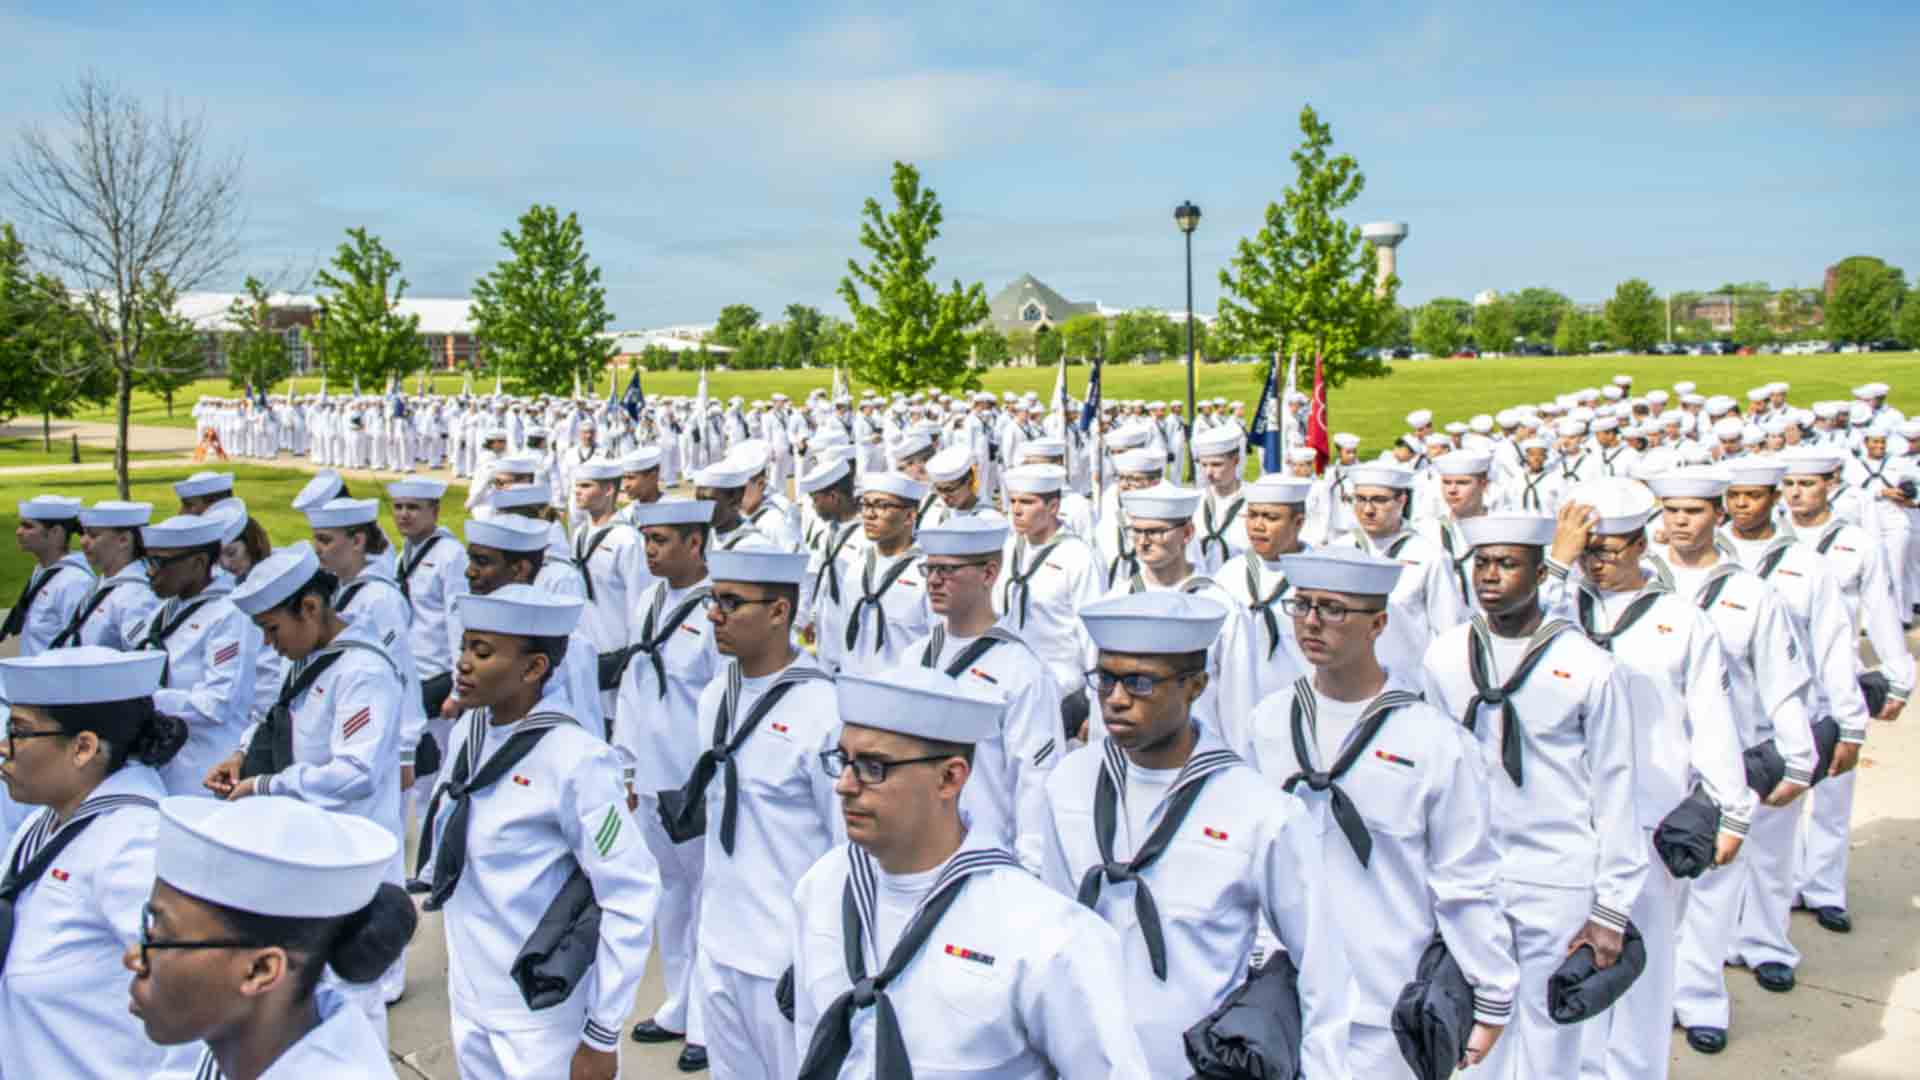 Joining The United States Navy How To Get Started Navy Com